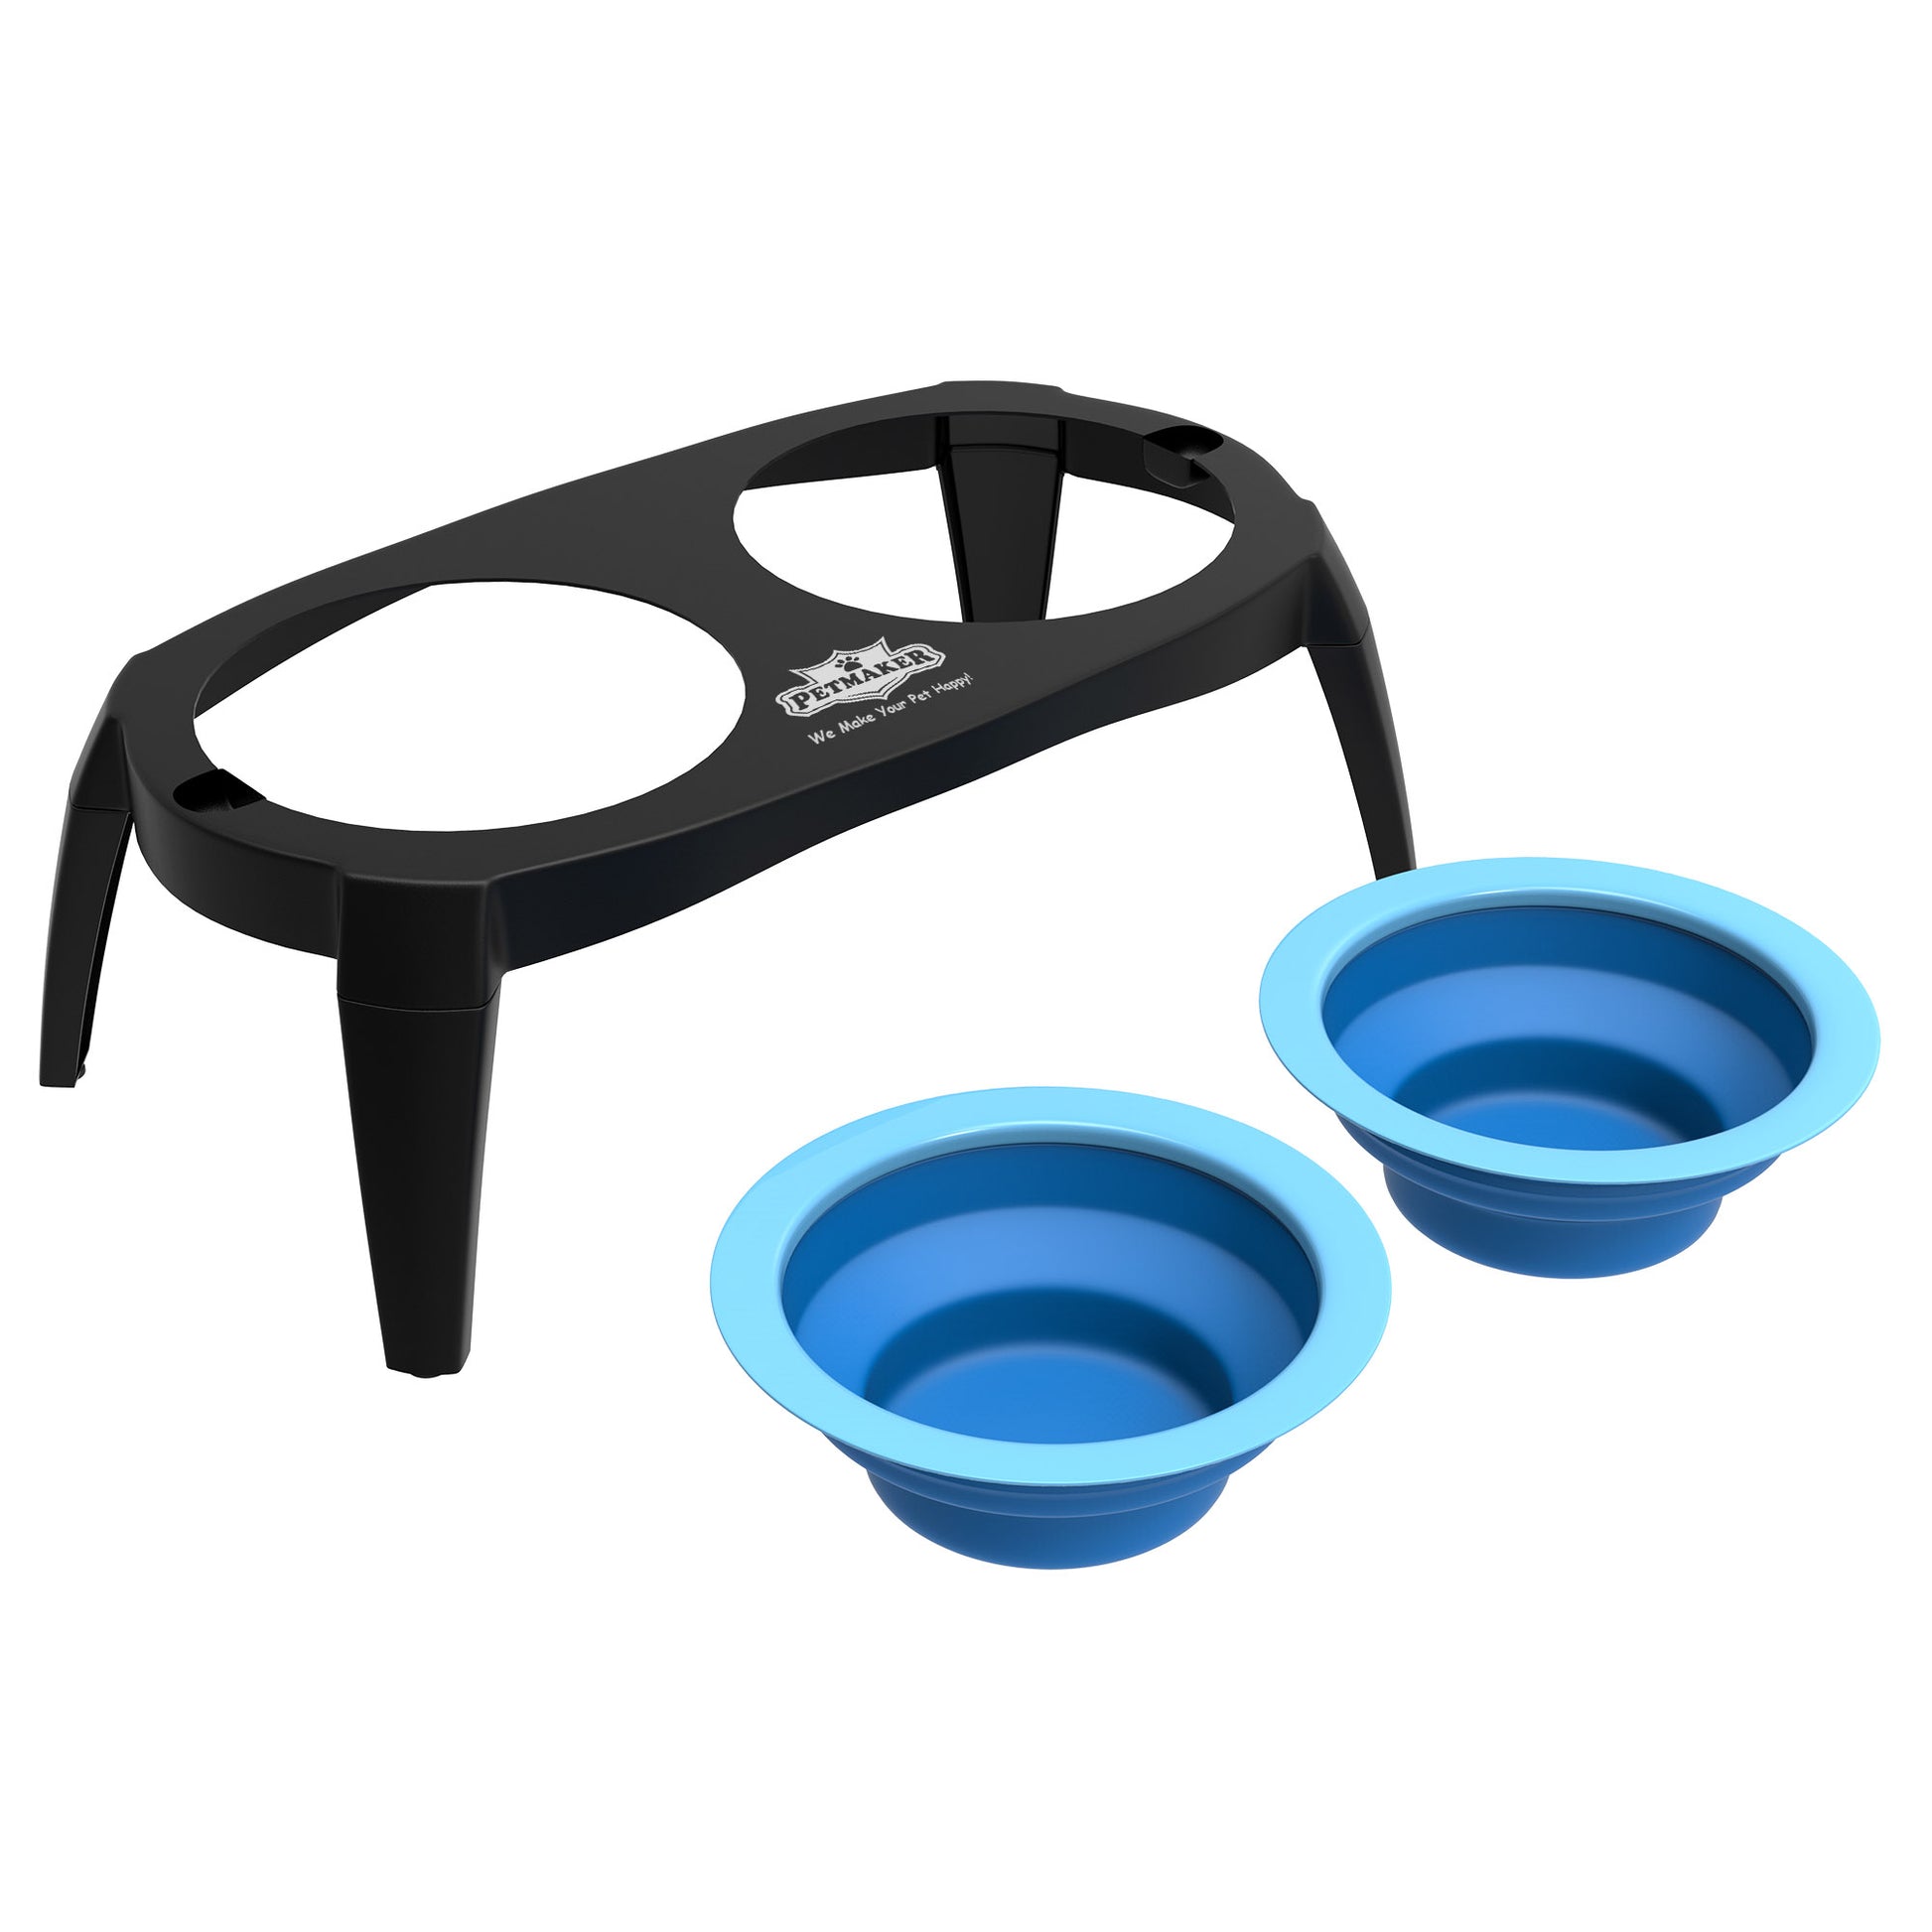 Petmaker Feeding Tray with Hidden Storage Space Elevated Feeder & Reviews